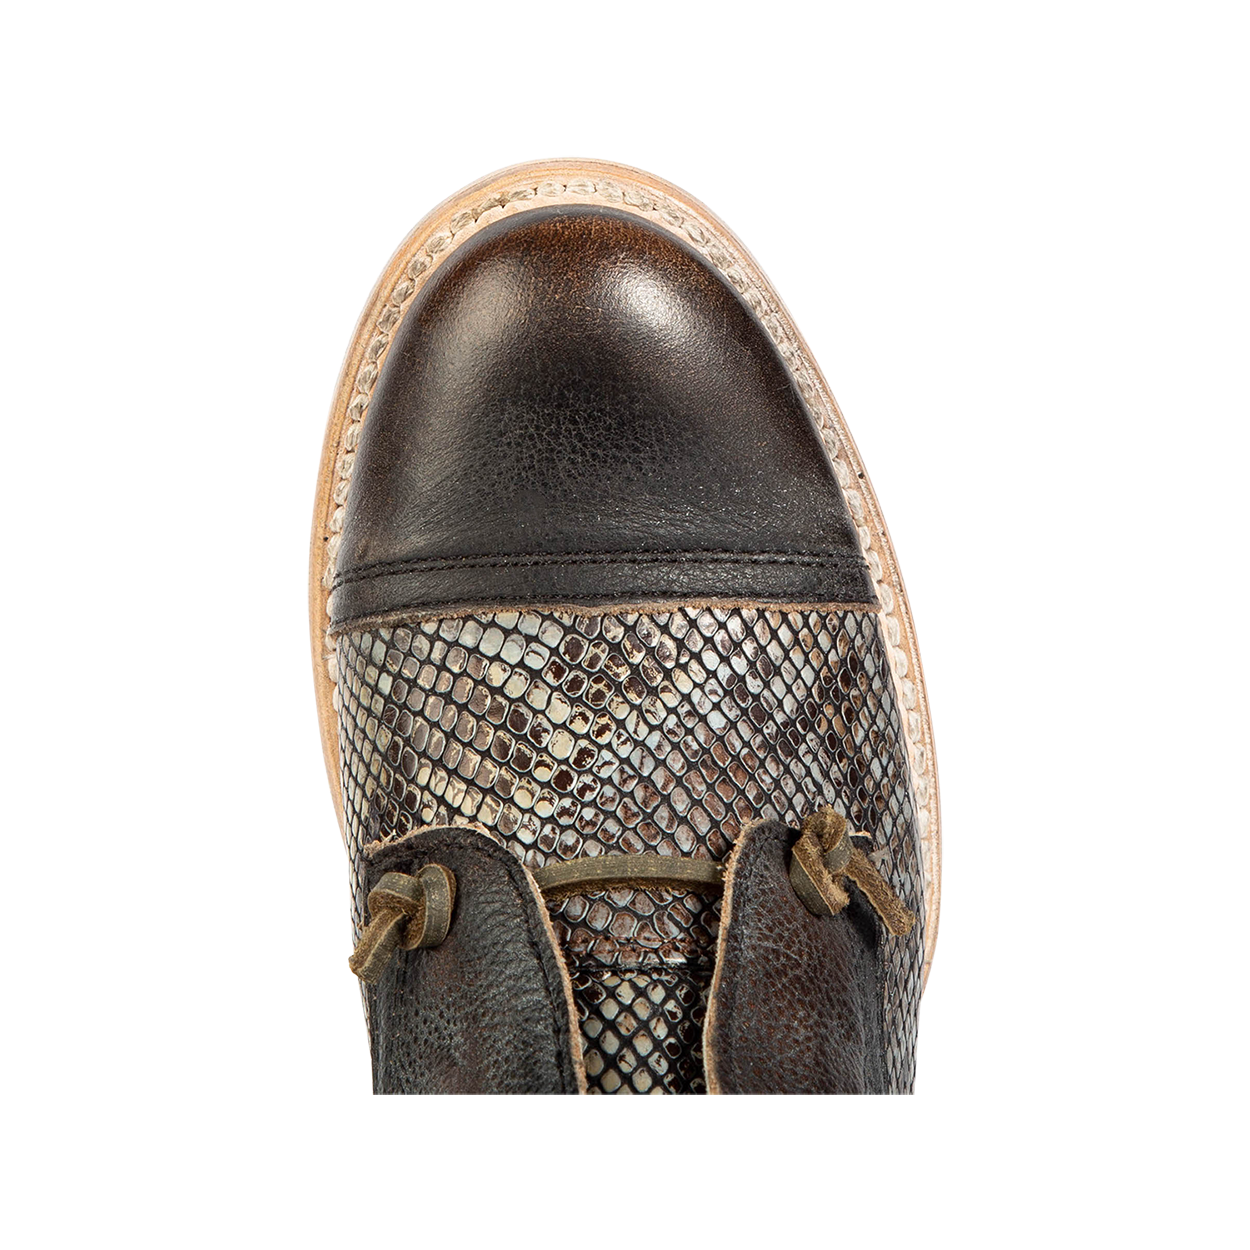 Top view showing almond toe and decorative knotted leather lace on FREEBIRD women's Mabel black multi shoe